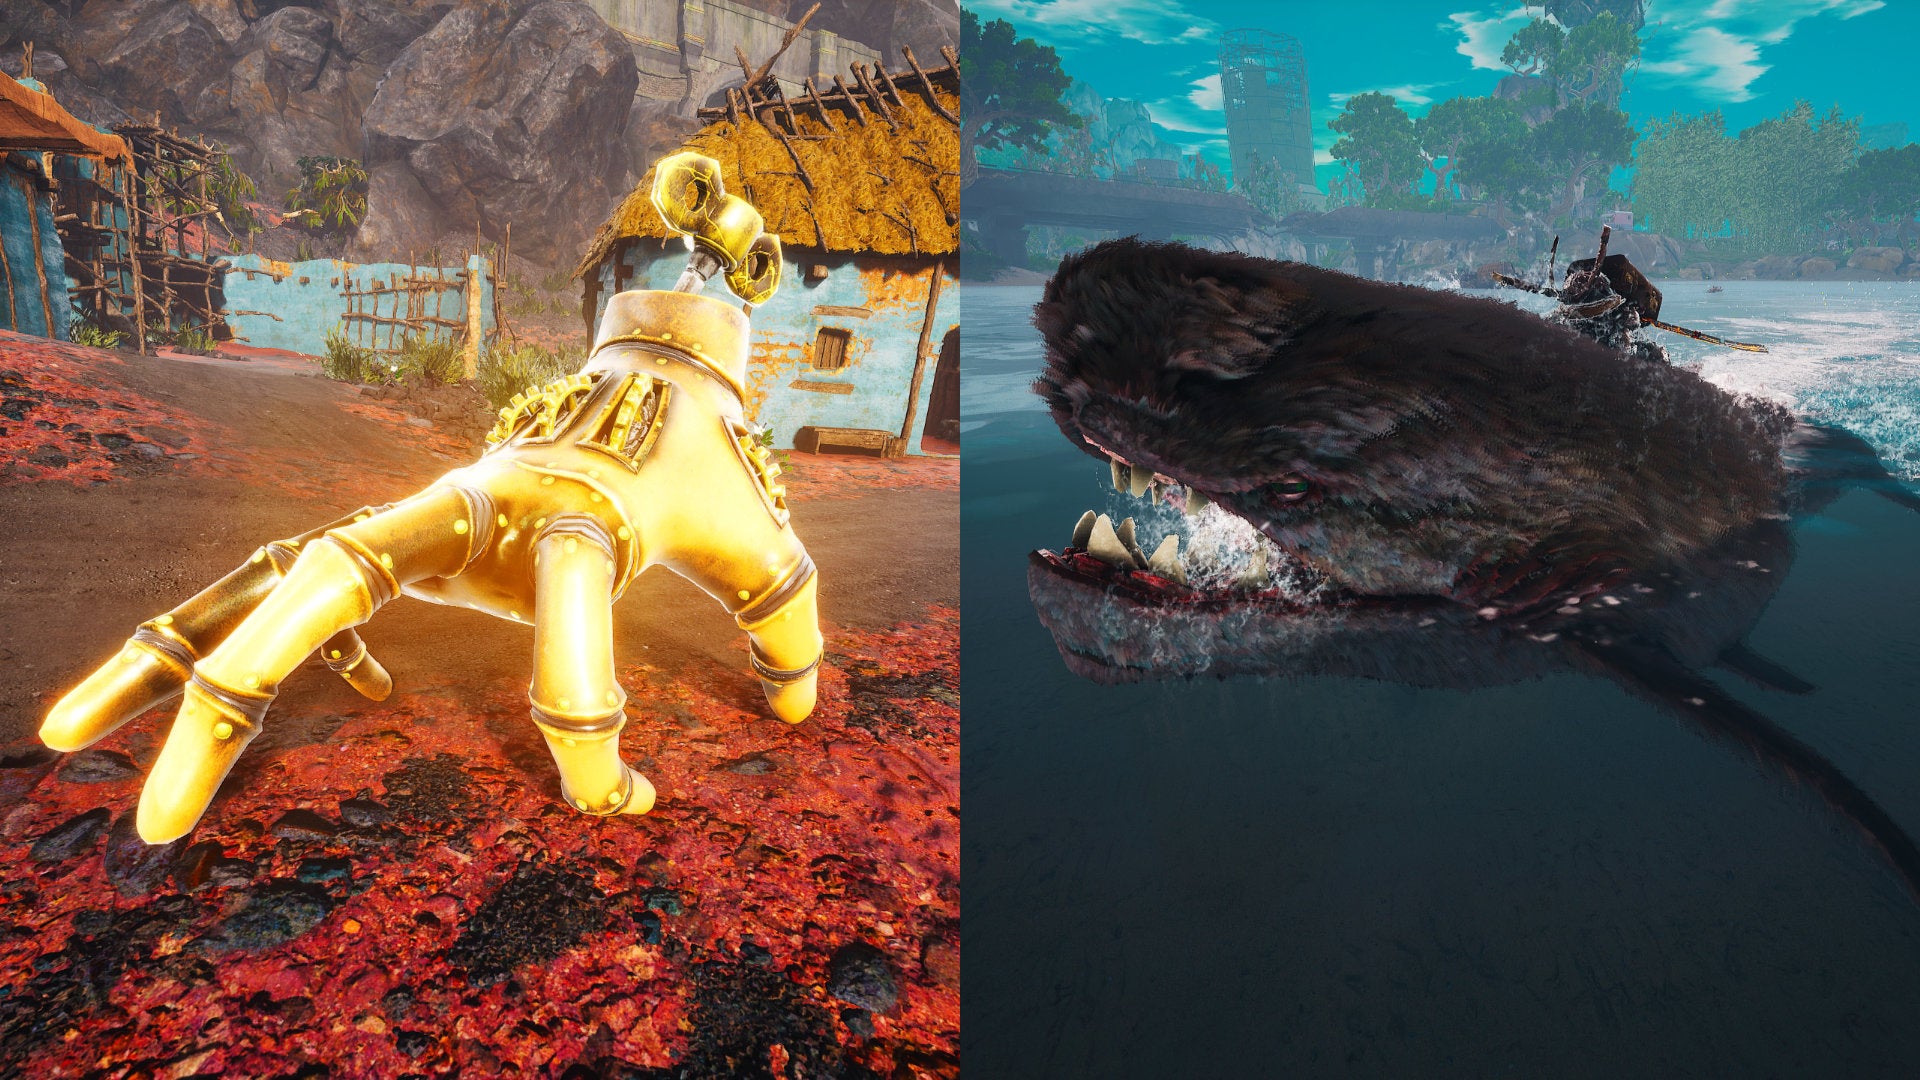 Two Biomutant screenshots of different mount types. On the left is the Mekafingro, and on the right is the Pee-Wee Gargantua.